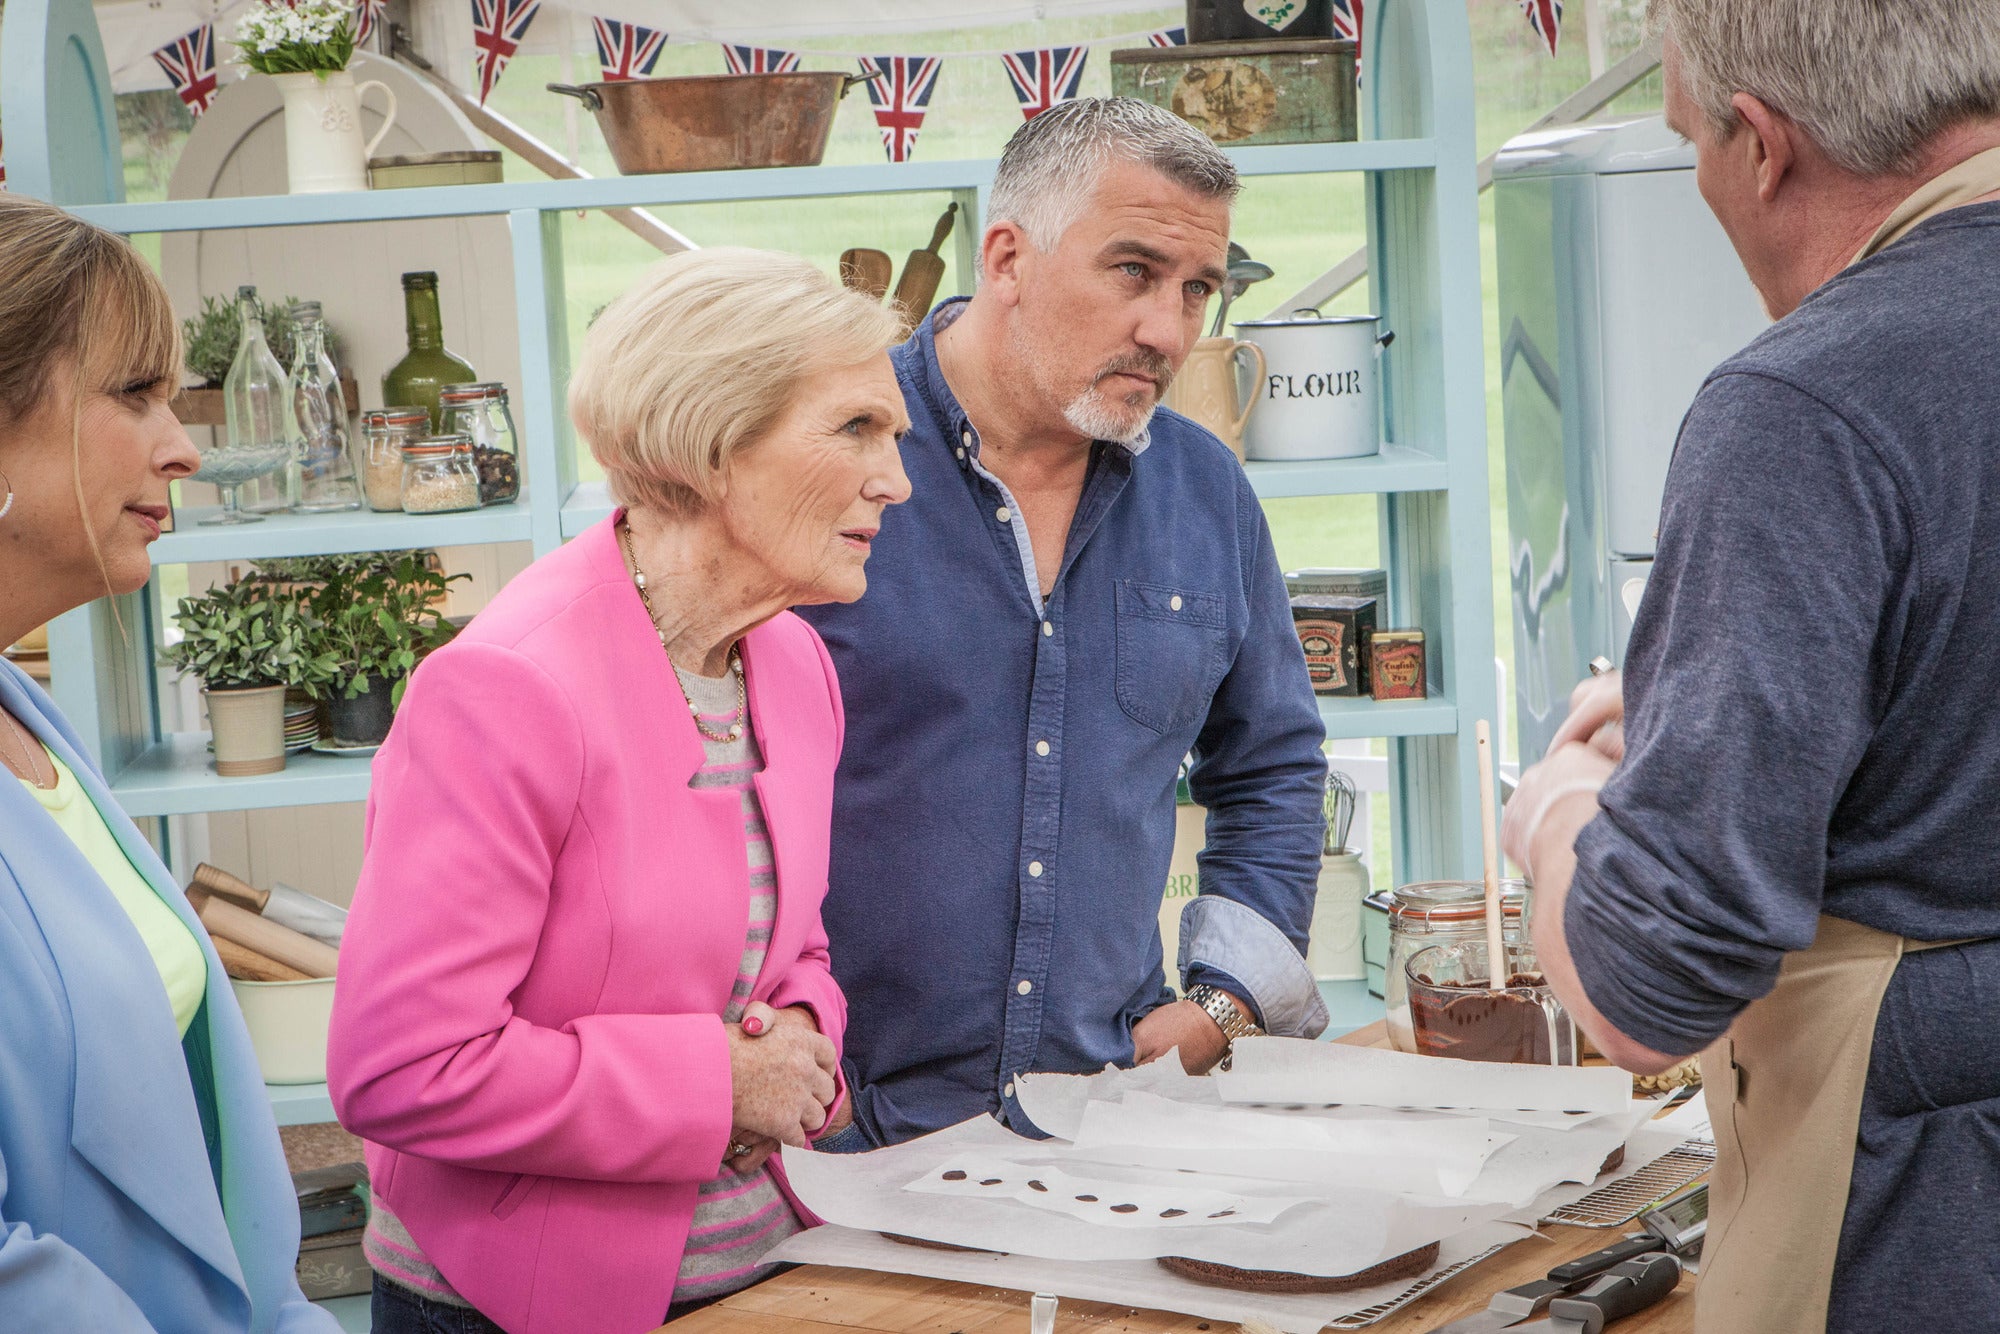 Whether Mary Berry and Paul Hollywood will be moving to Channel 4 remains to be seen